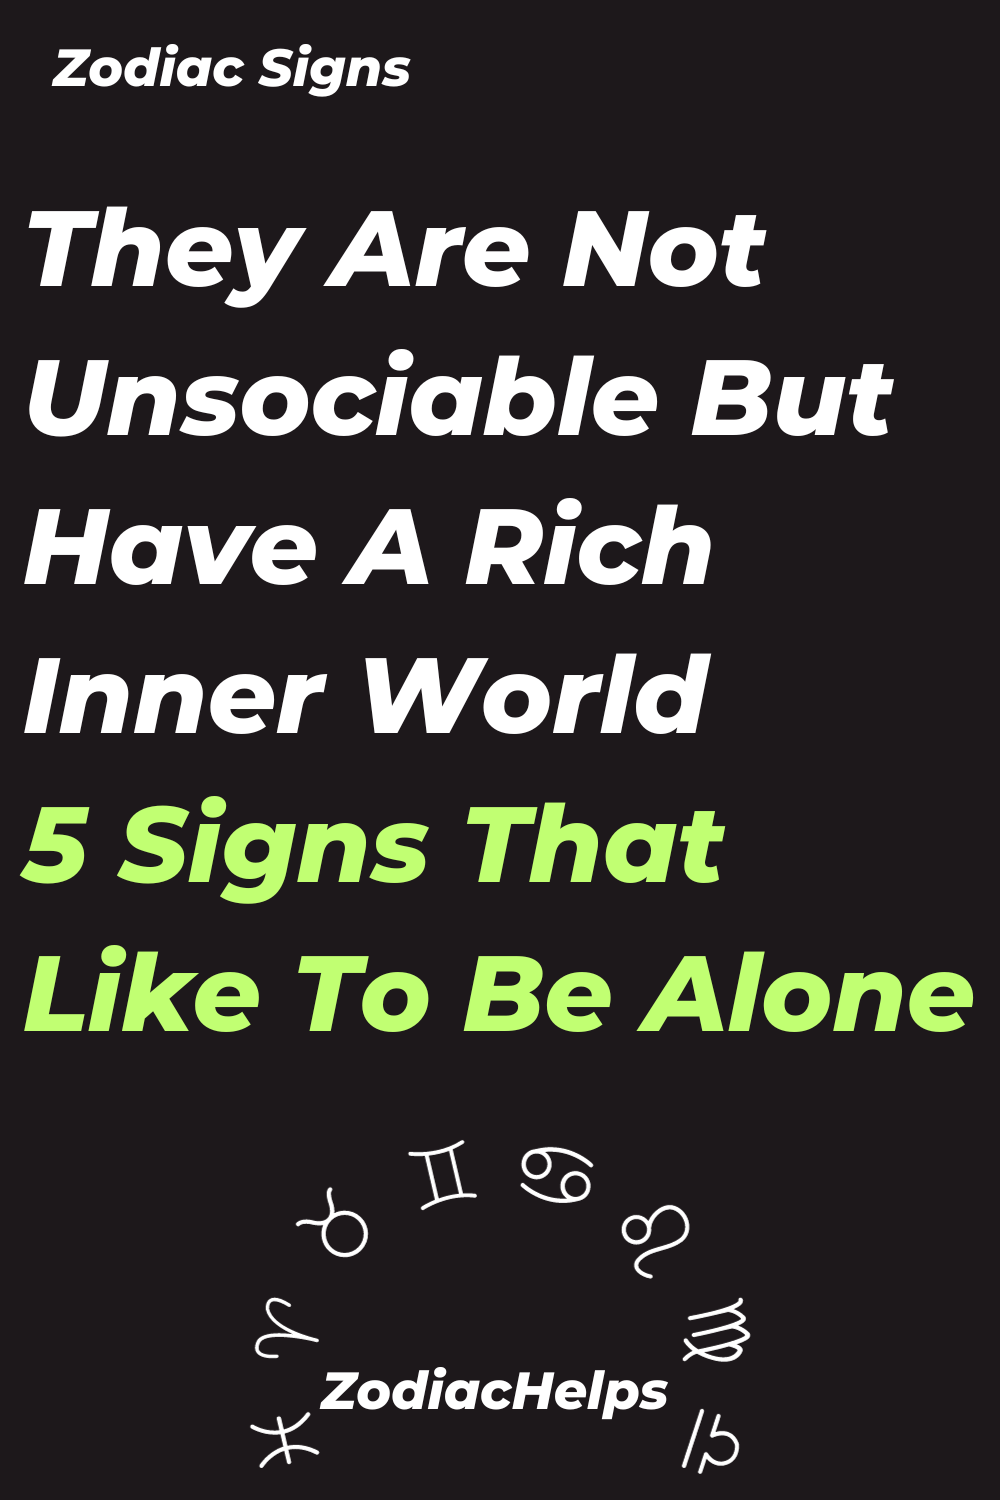 They Are Not Unsociable, But Have A Rich Inner World - 5 Signs That Like To Be Alone